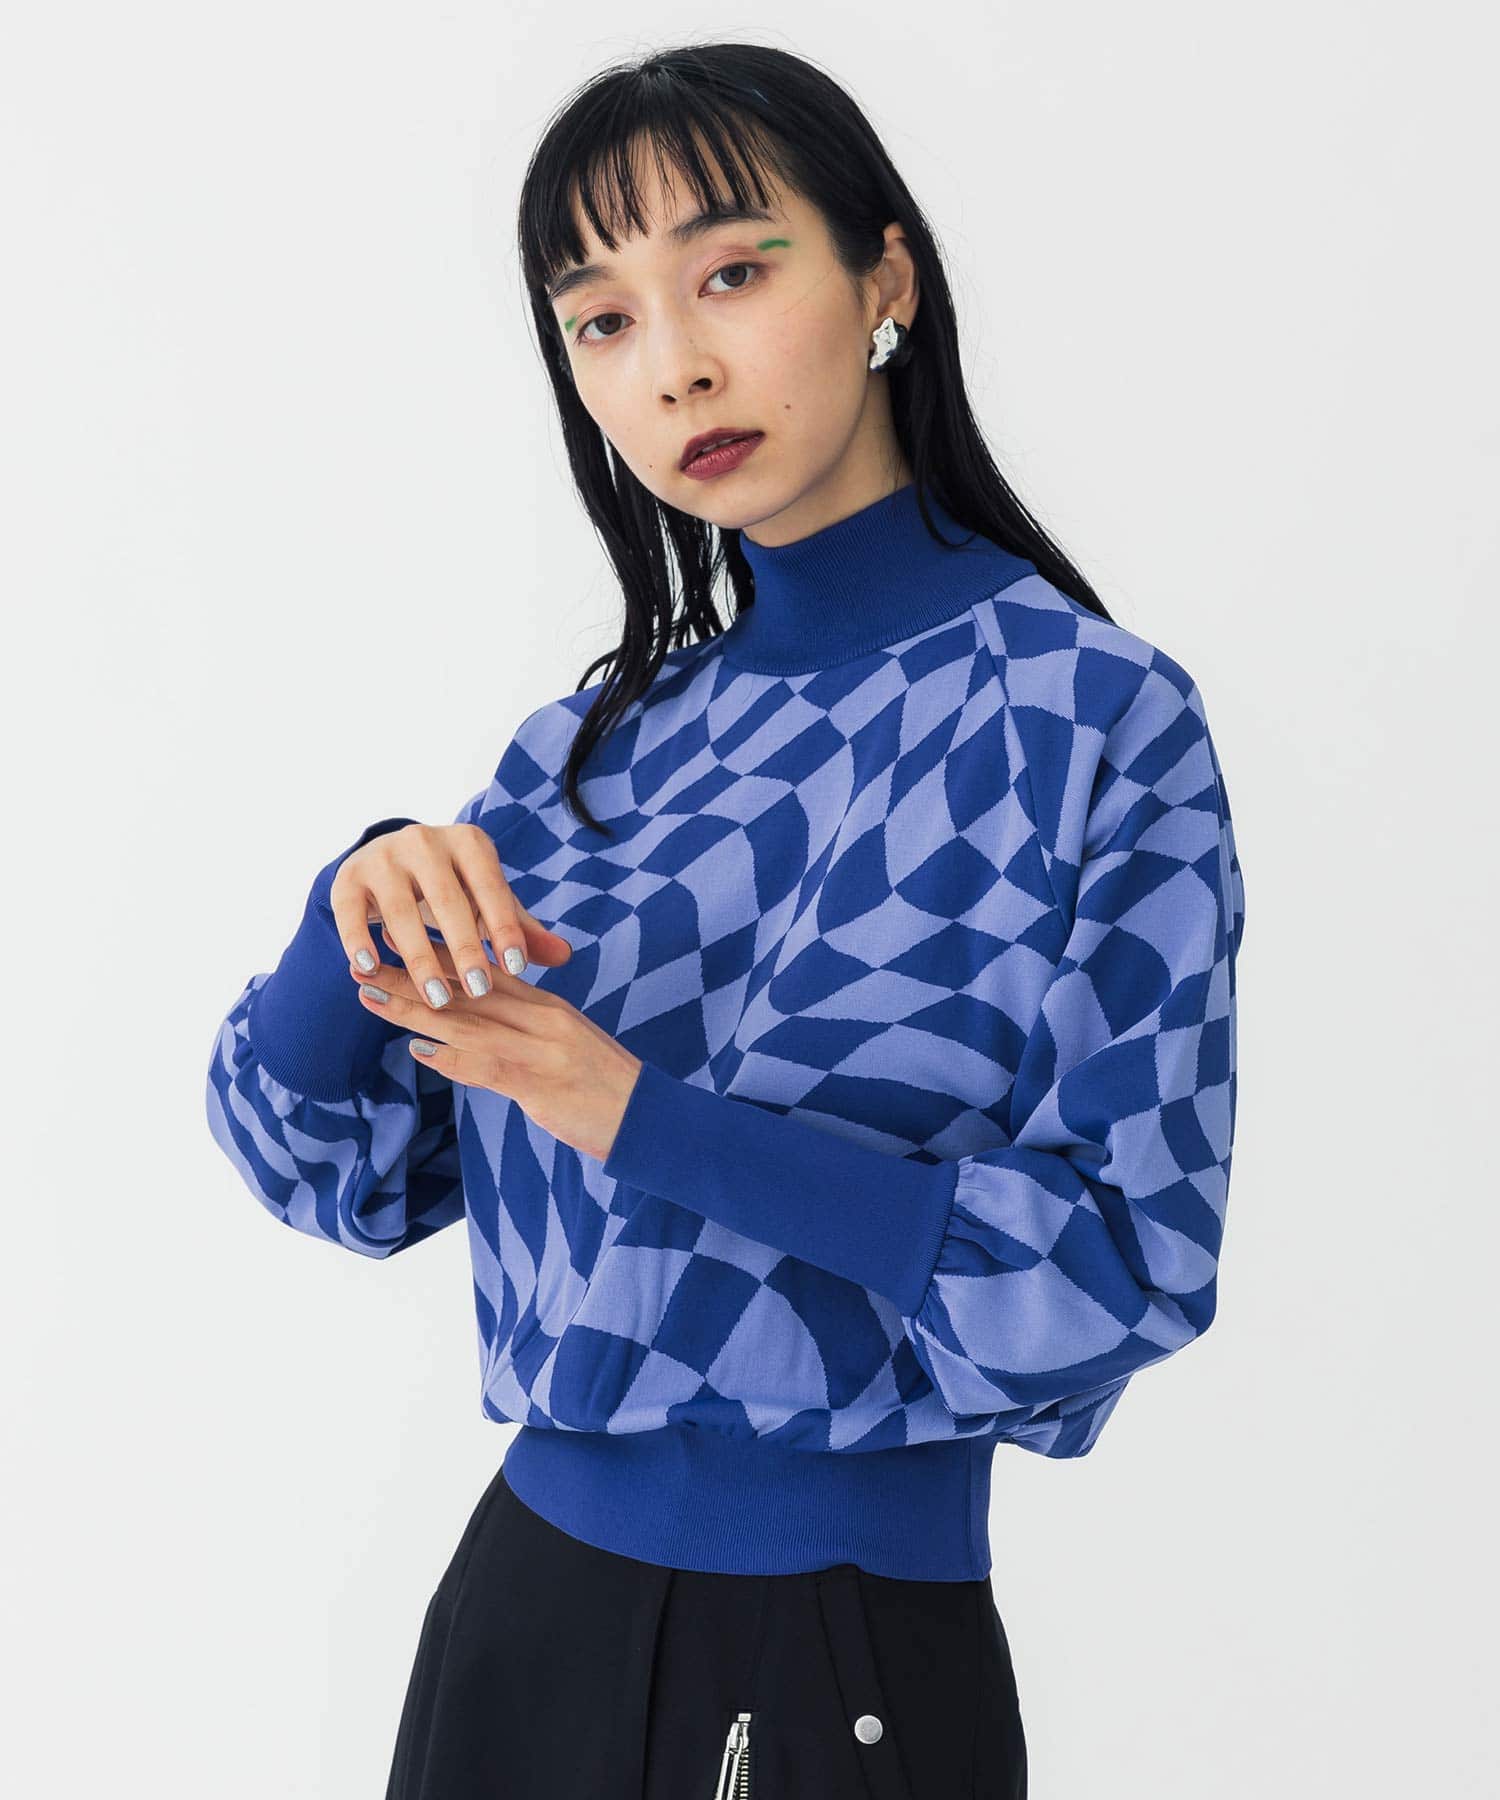 WOMENS】NEW 商品一覧: ｜UNITED TOKYO ONLINE STORE